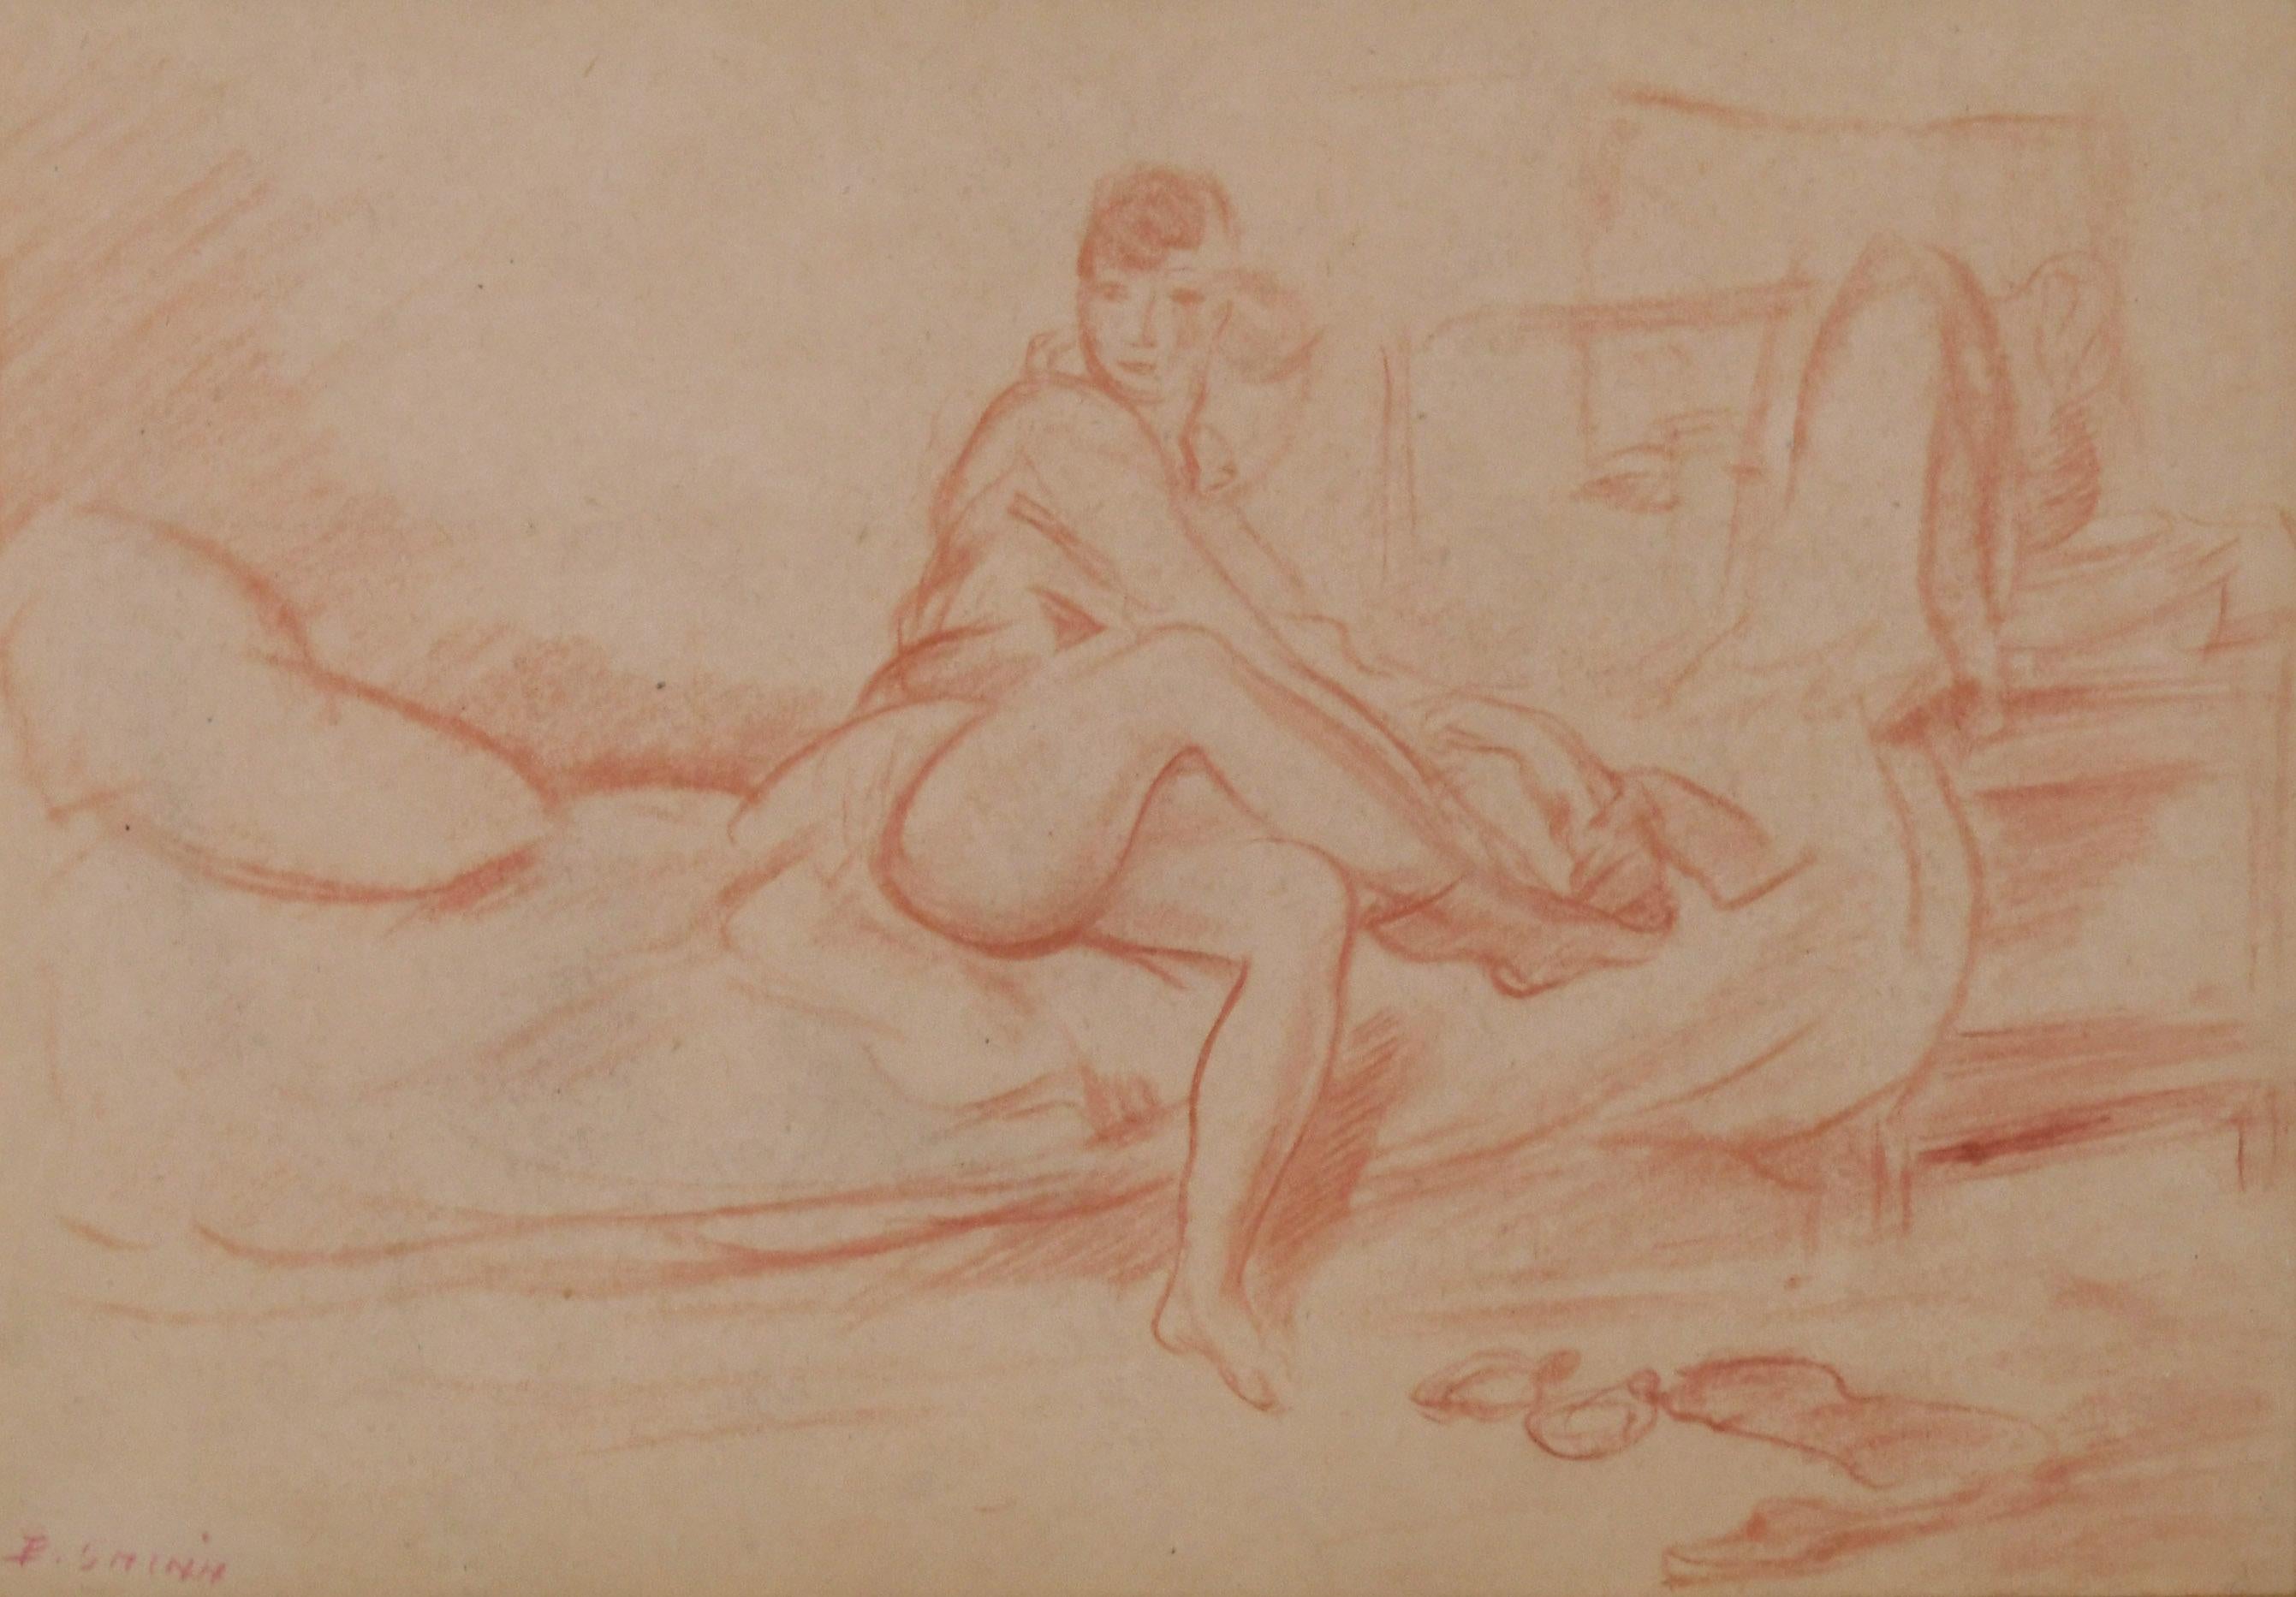 Untitled (Woman Removing Her Stockings)